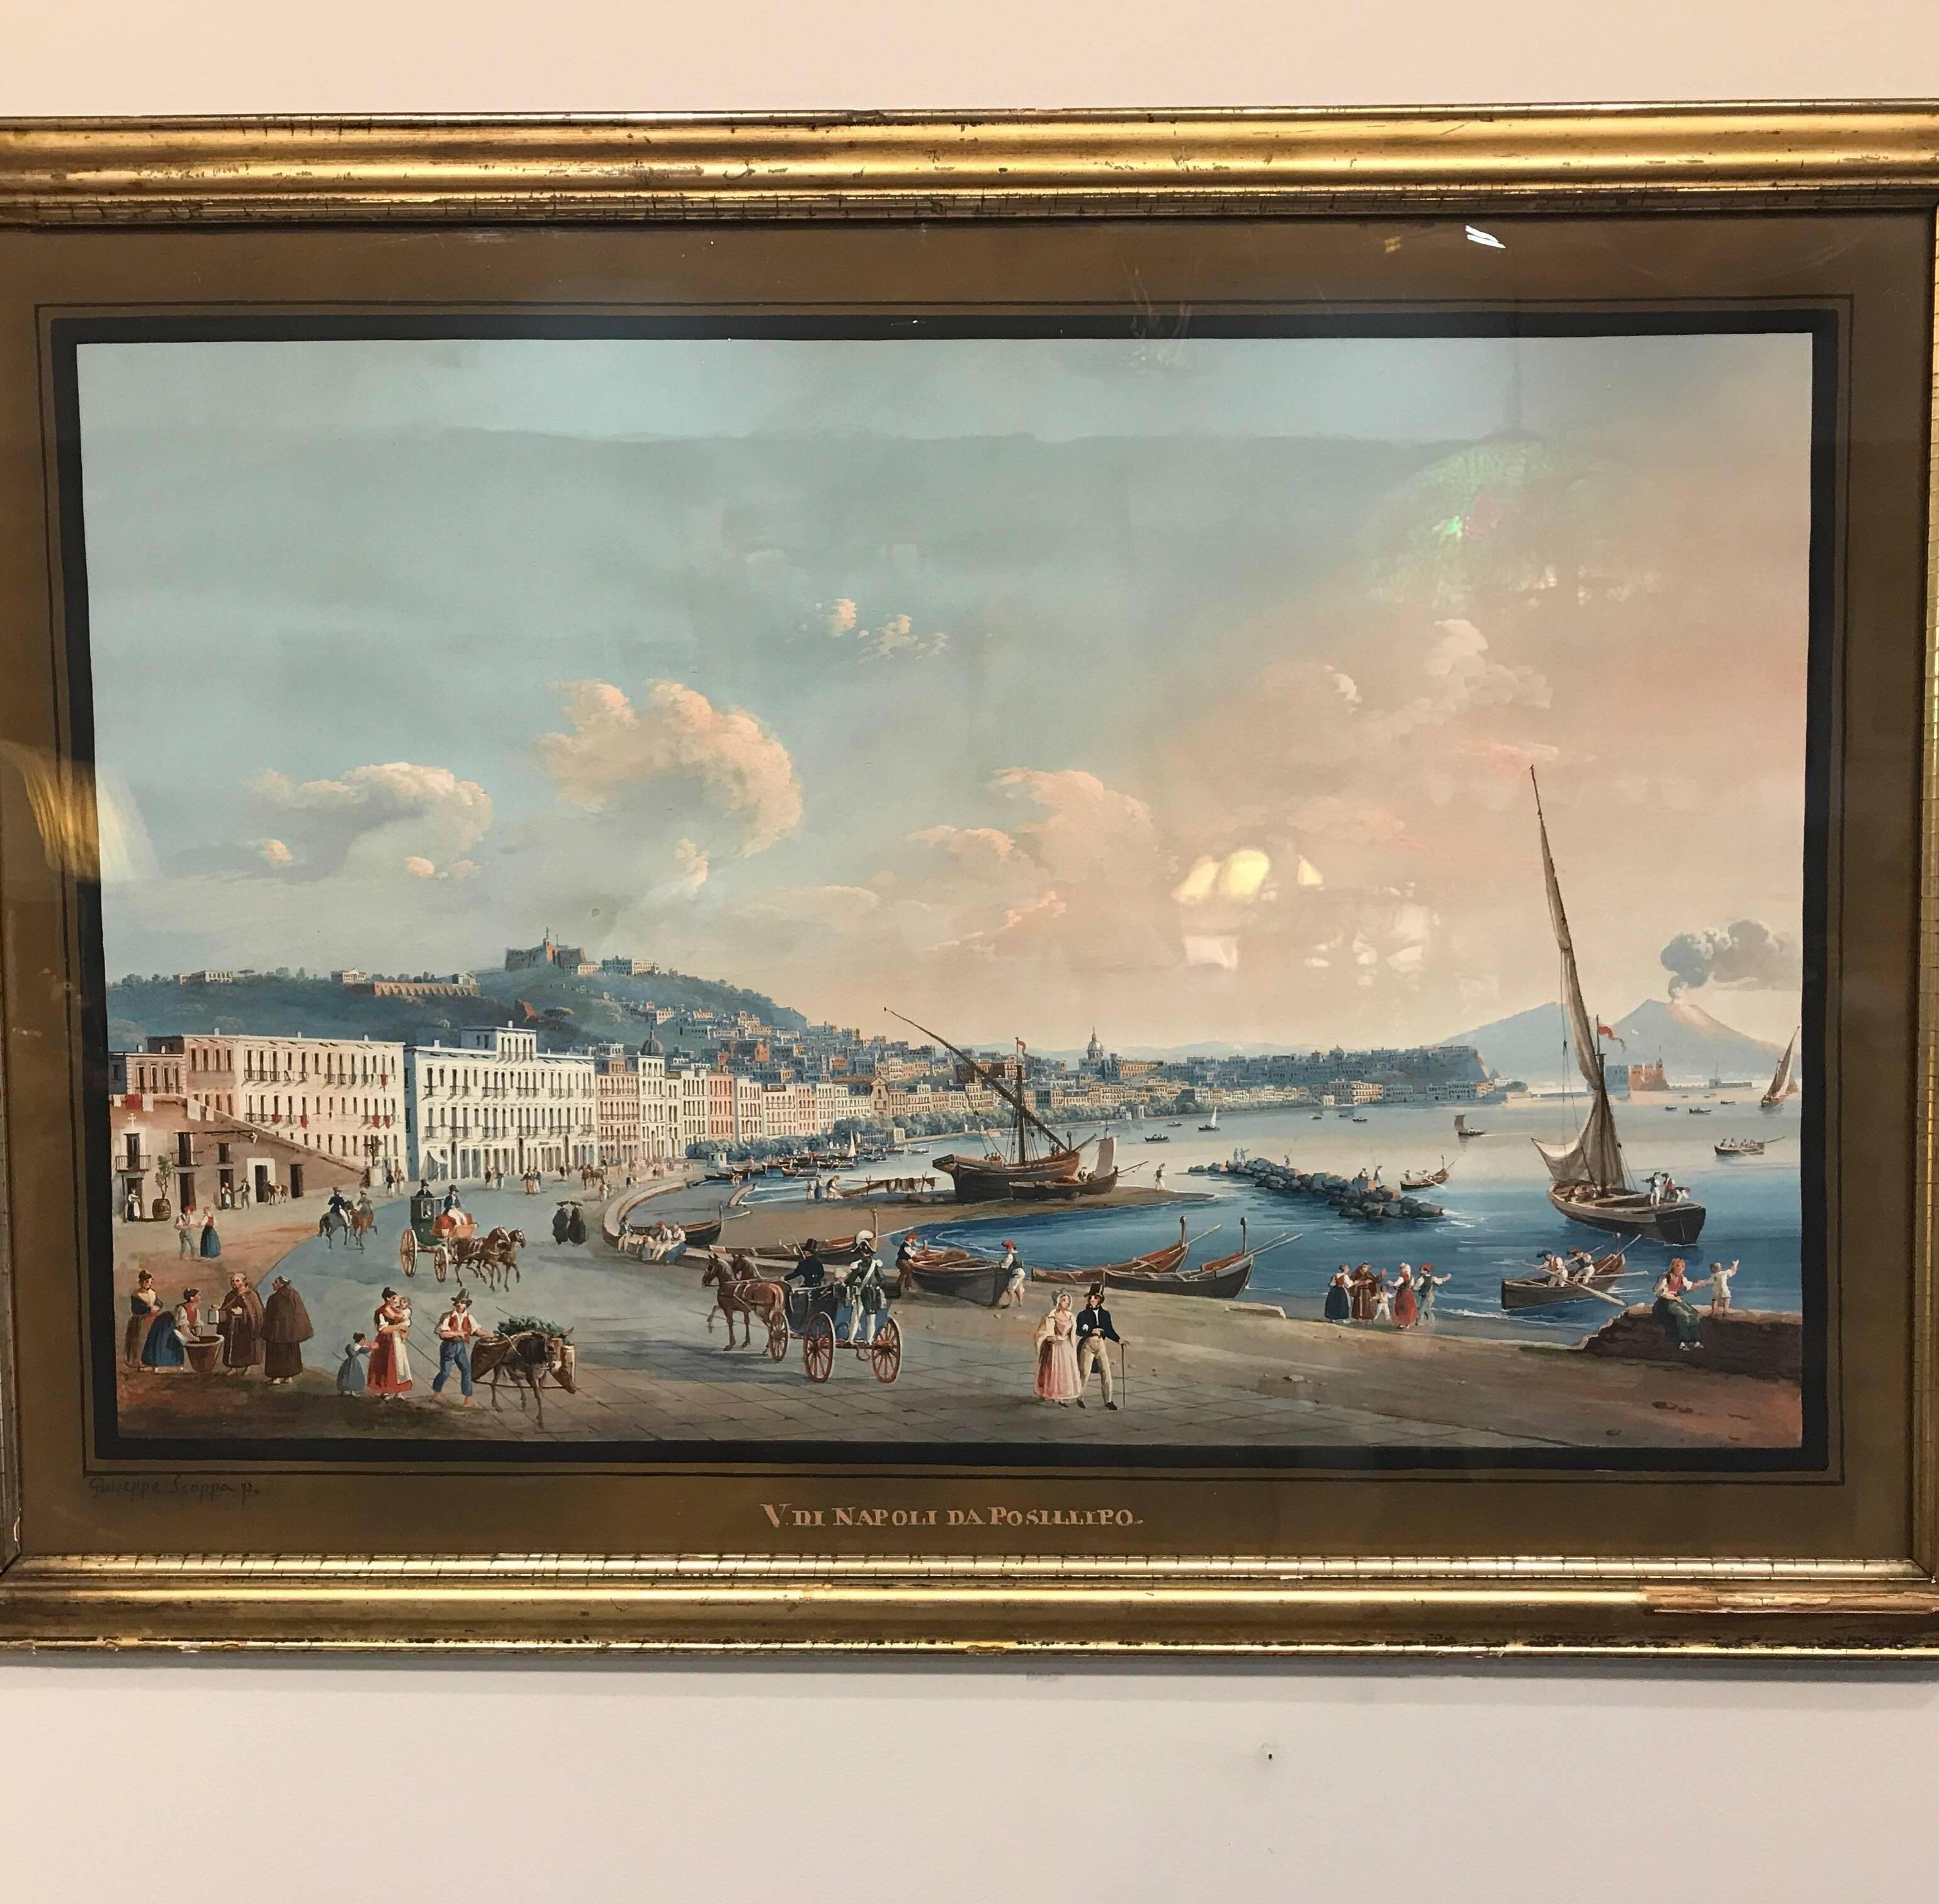 A maritime gouache painting by exceptionally skilled artist Scoppa. Son of Raimondo Scoppa (1820-1890), a professor at the Academy of Fine Arts in Naples. The beautiful painting is in its original gilt frame with original protective glass. Framed 31